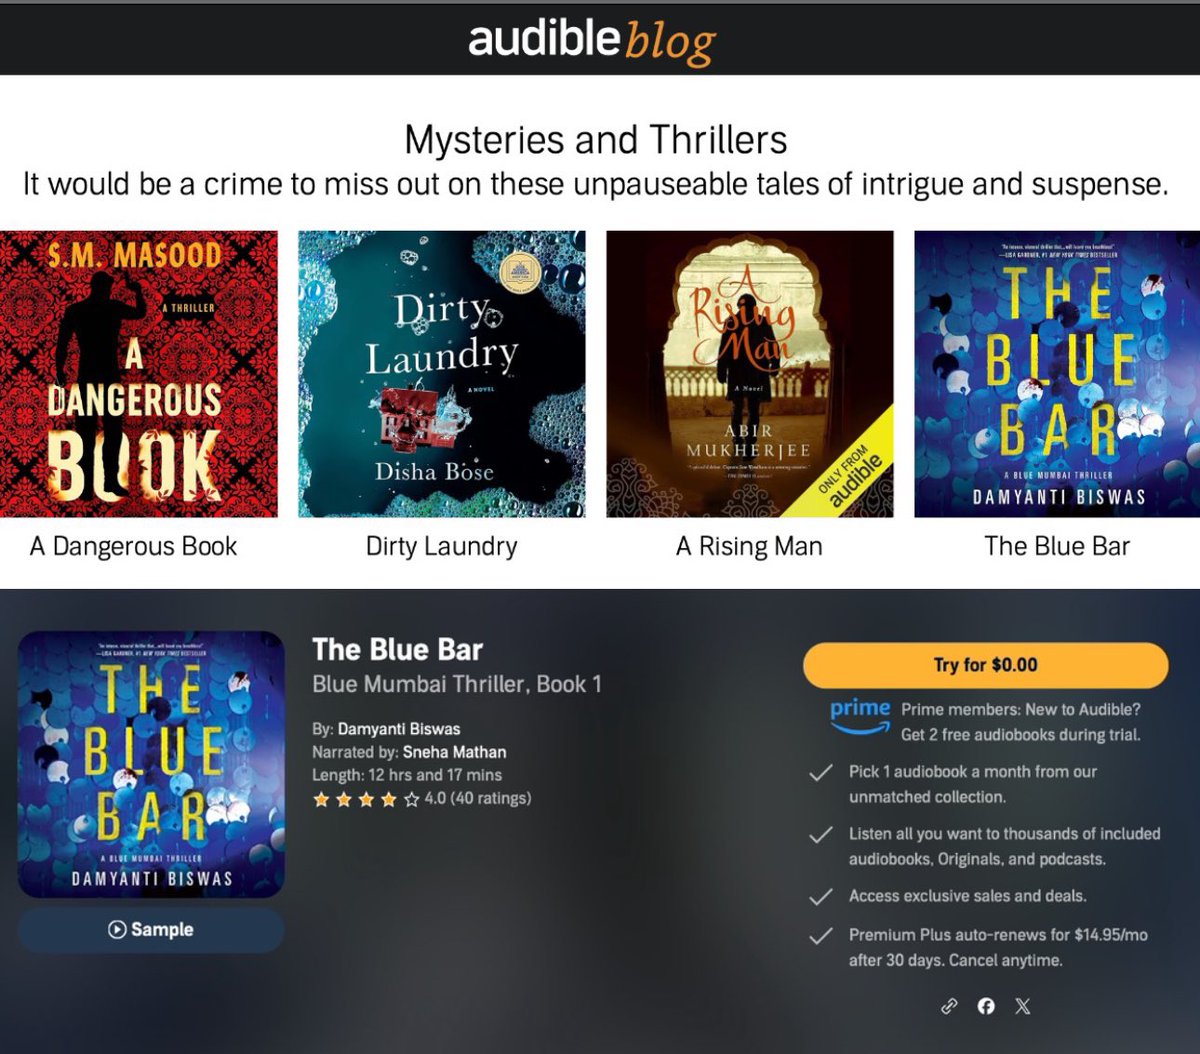 Thrilled to see THE BLUE BAR featured by Audible for its South Asian Mysteries and Thrillers section! The audiobook is free with #KindleUnlimited #Bookboost